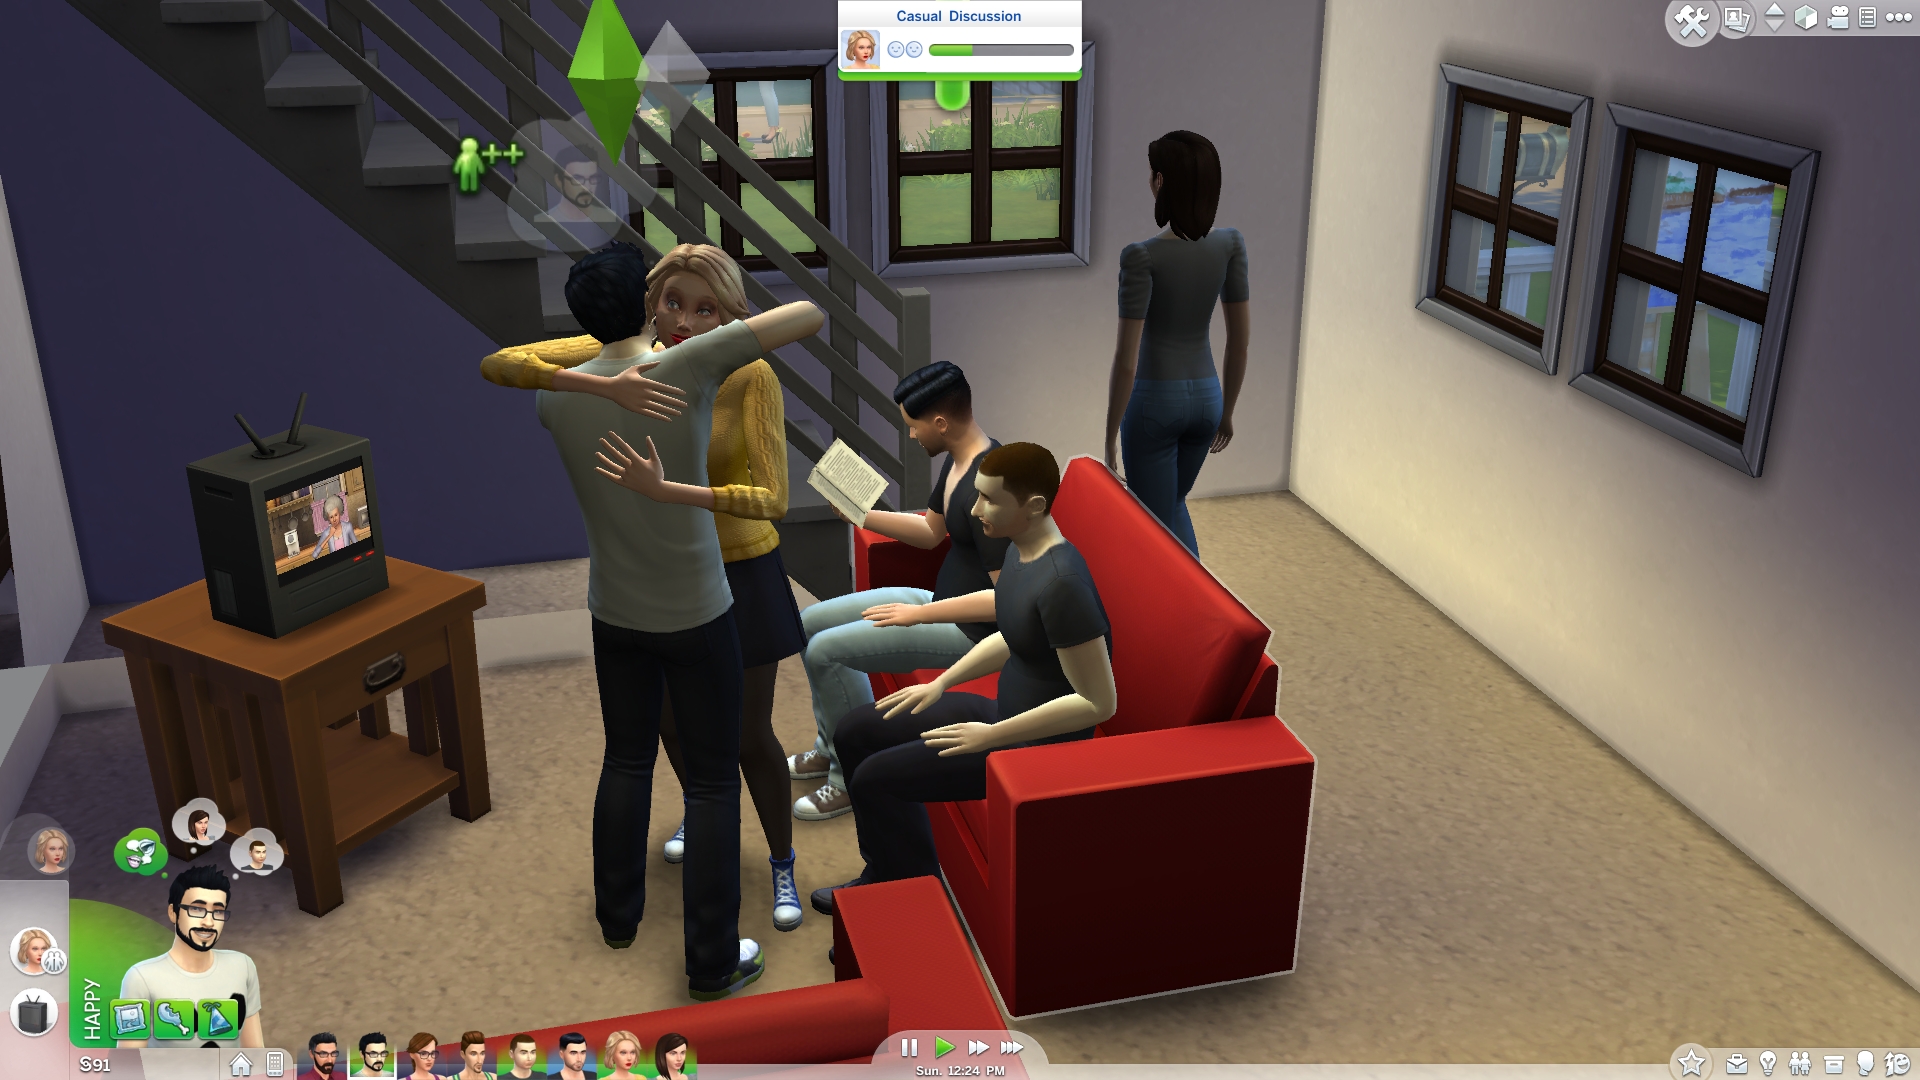 ESA Report: The Sims 4 Top Selling PC Game of 2014